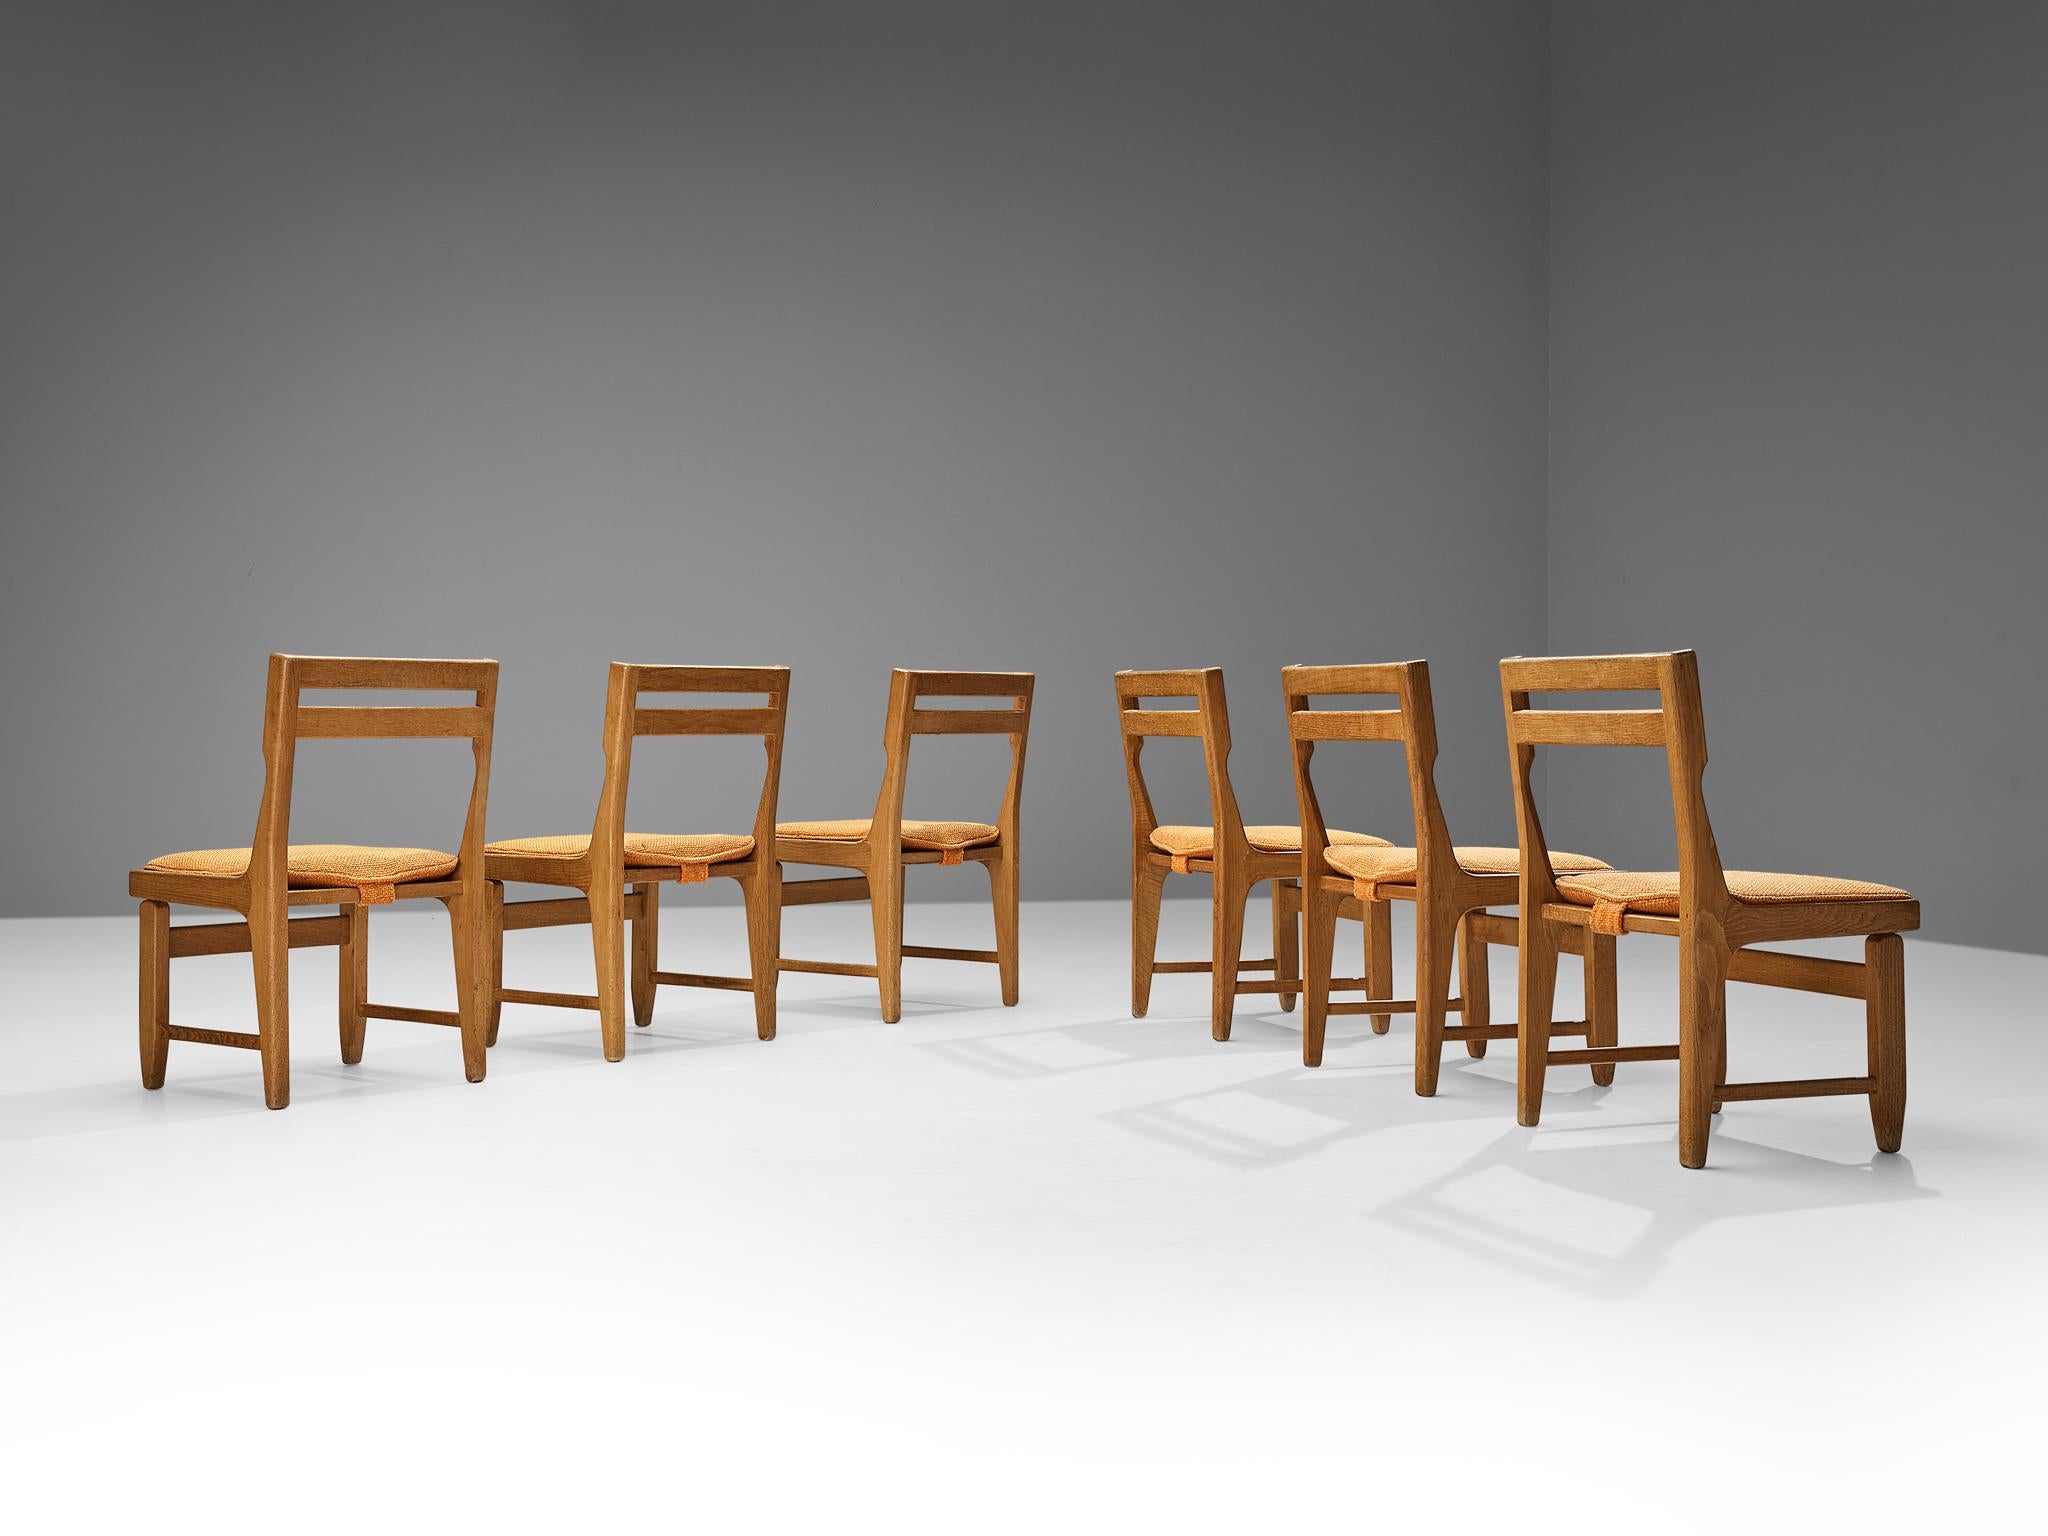 Guillerme & Chambron for Votre Maison, set of six dining chairs, model 'Raphaël', dark stained oak, fabric upholstery, France, 1960s 

This set of dining chairs shows the typical traits of the designs by French designer duo Guillerme et Chambron.